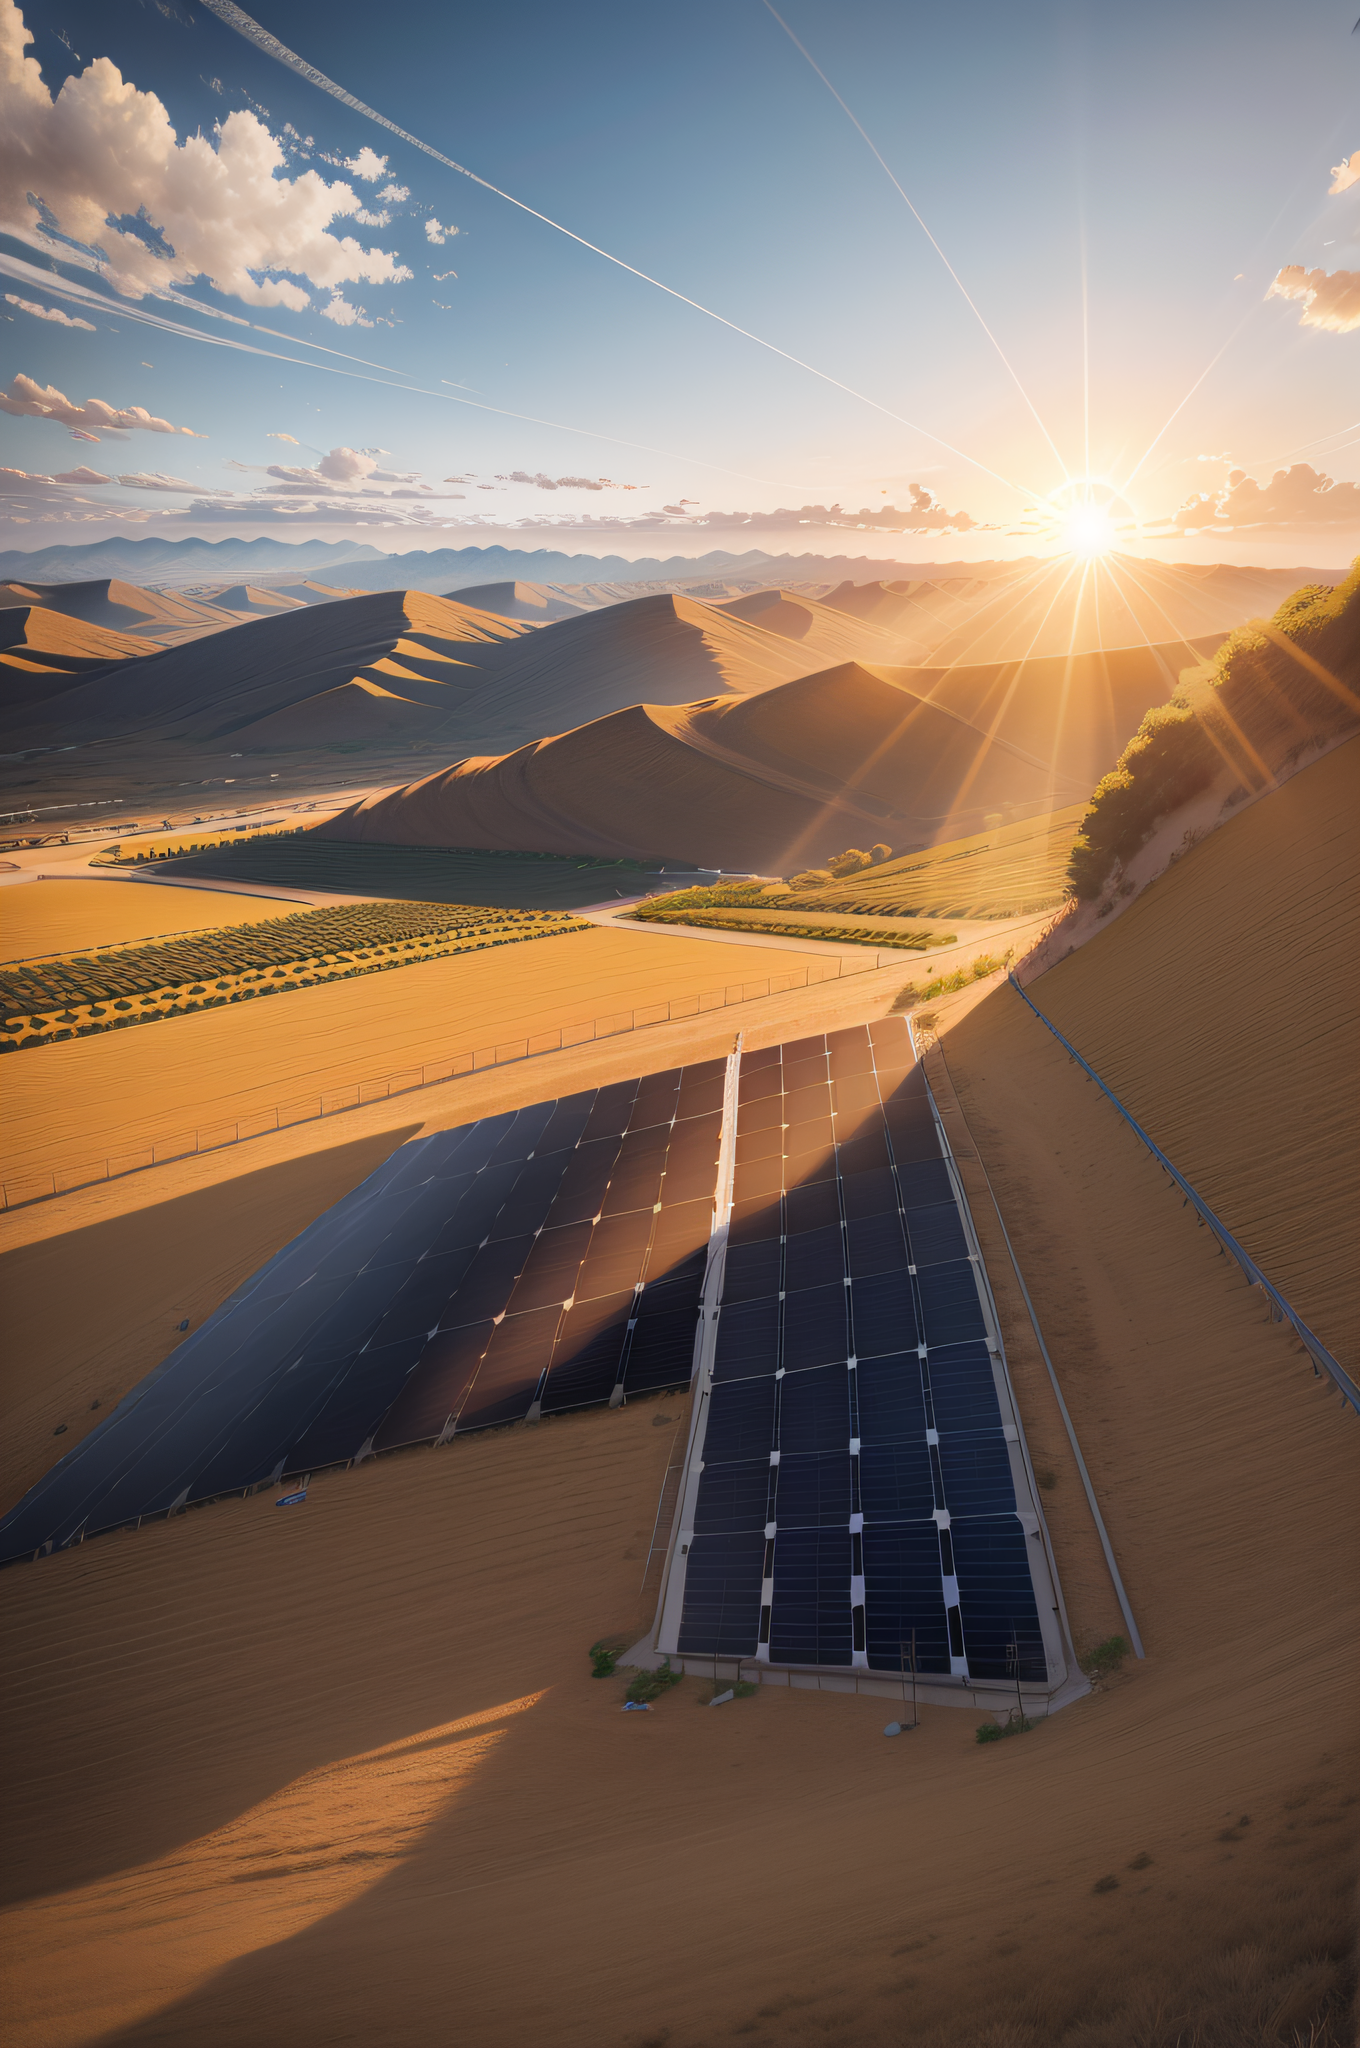 Daily Innovations in Renewable Energy: Powering a Sustainable Tomorrow